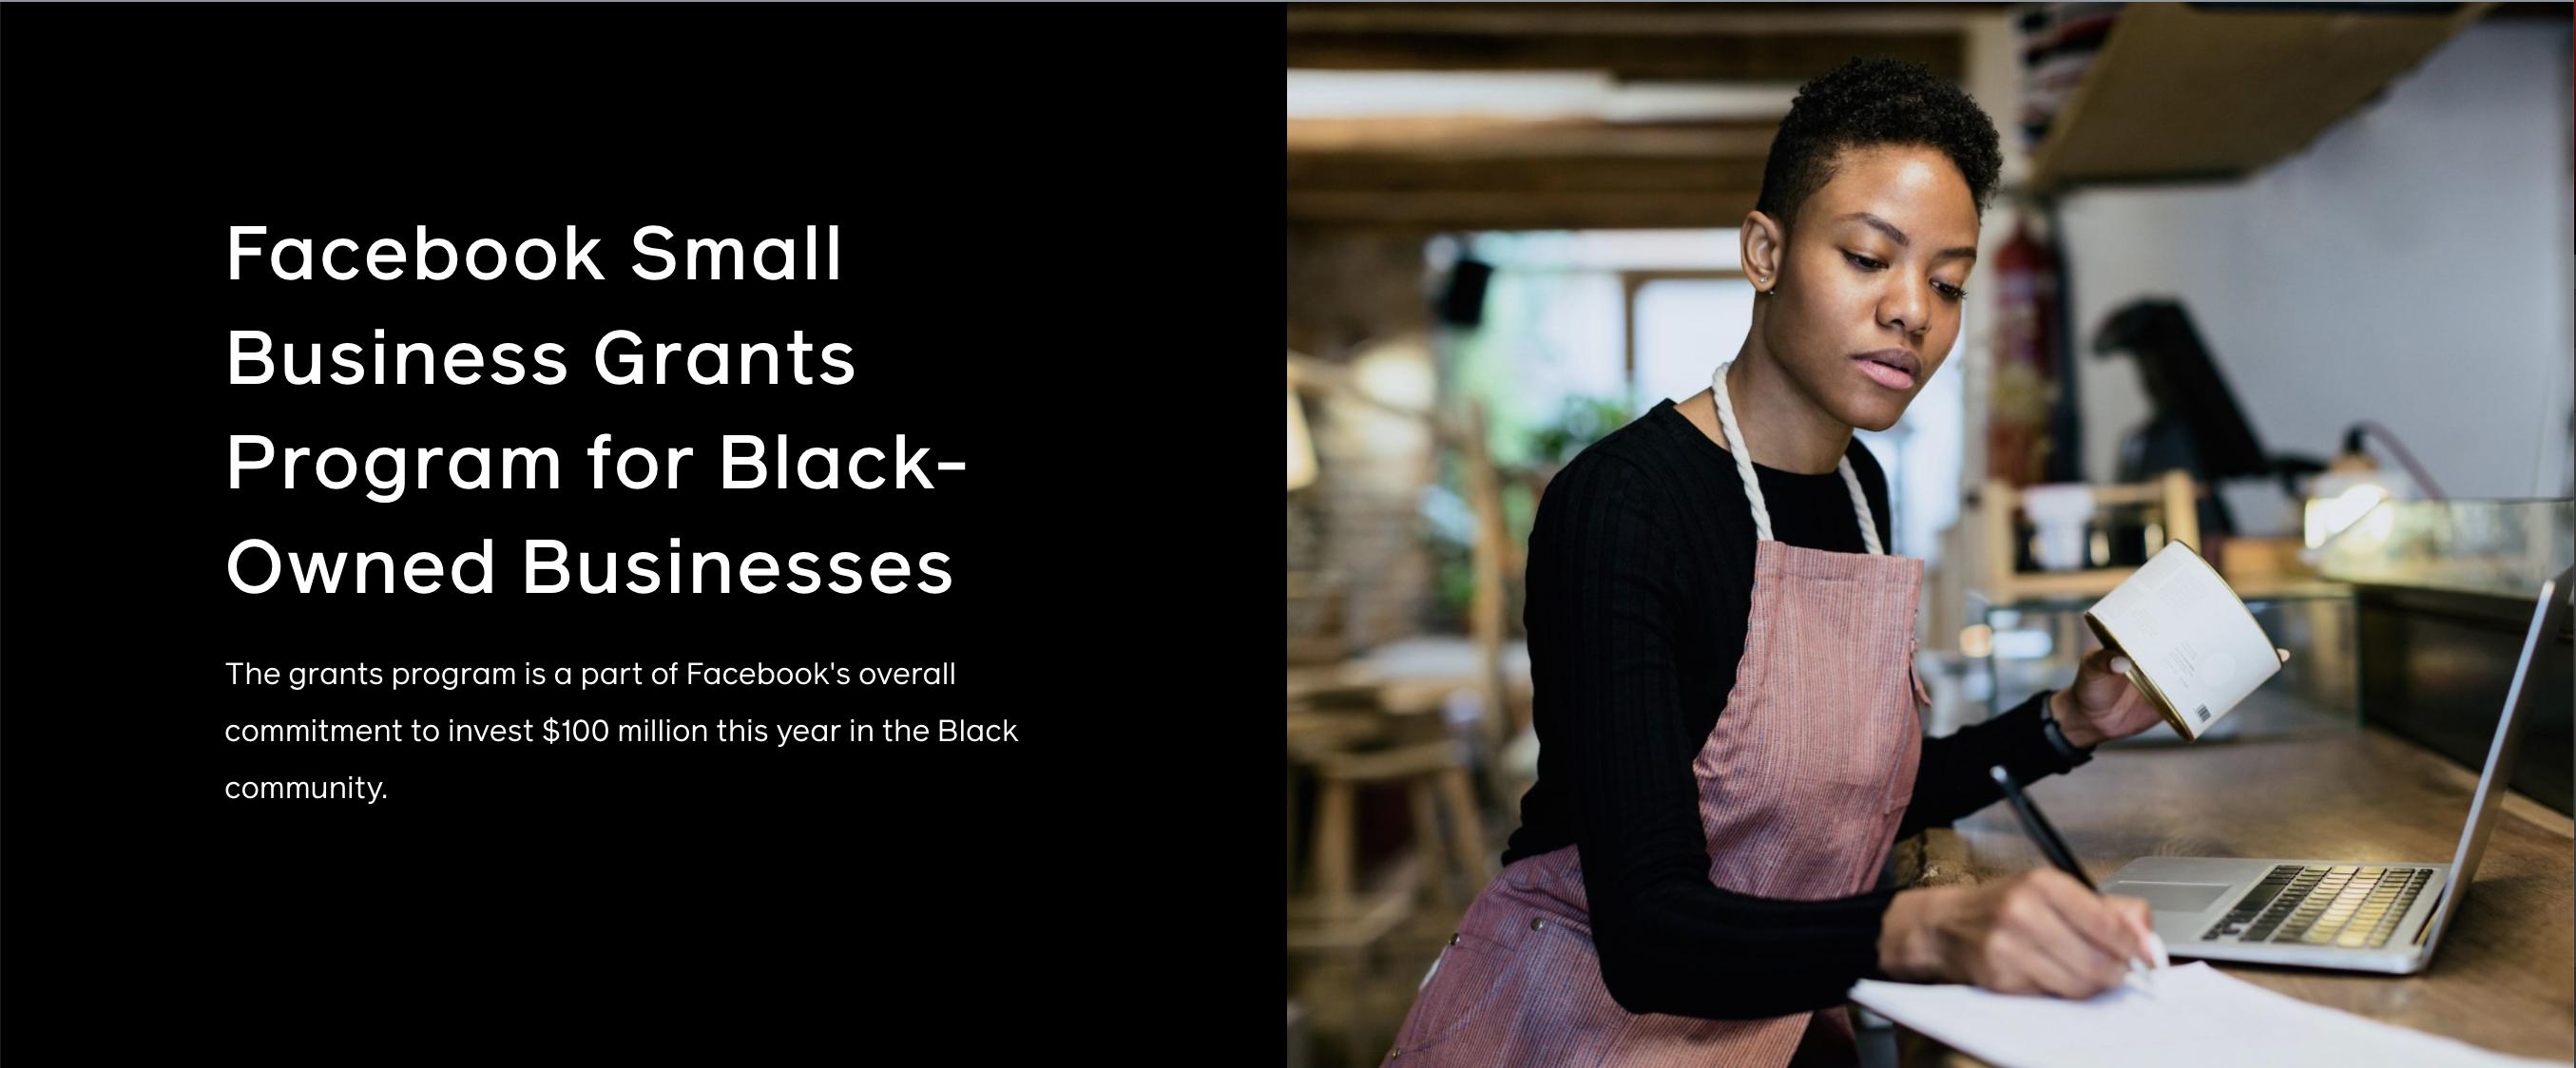 Facebook Small Business Grants Program for Black-Owned Businesses